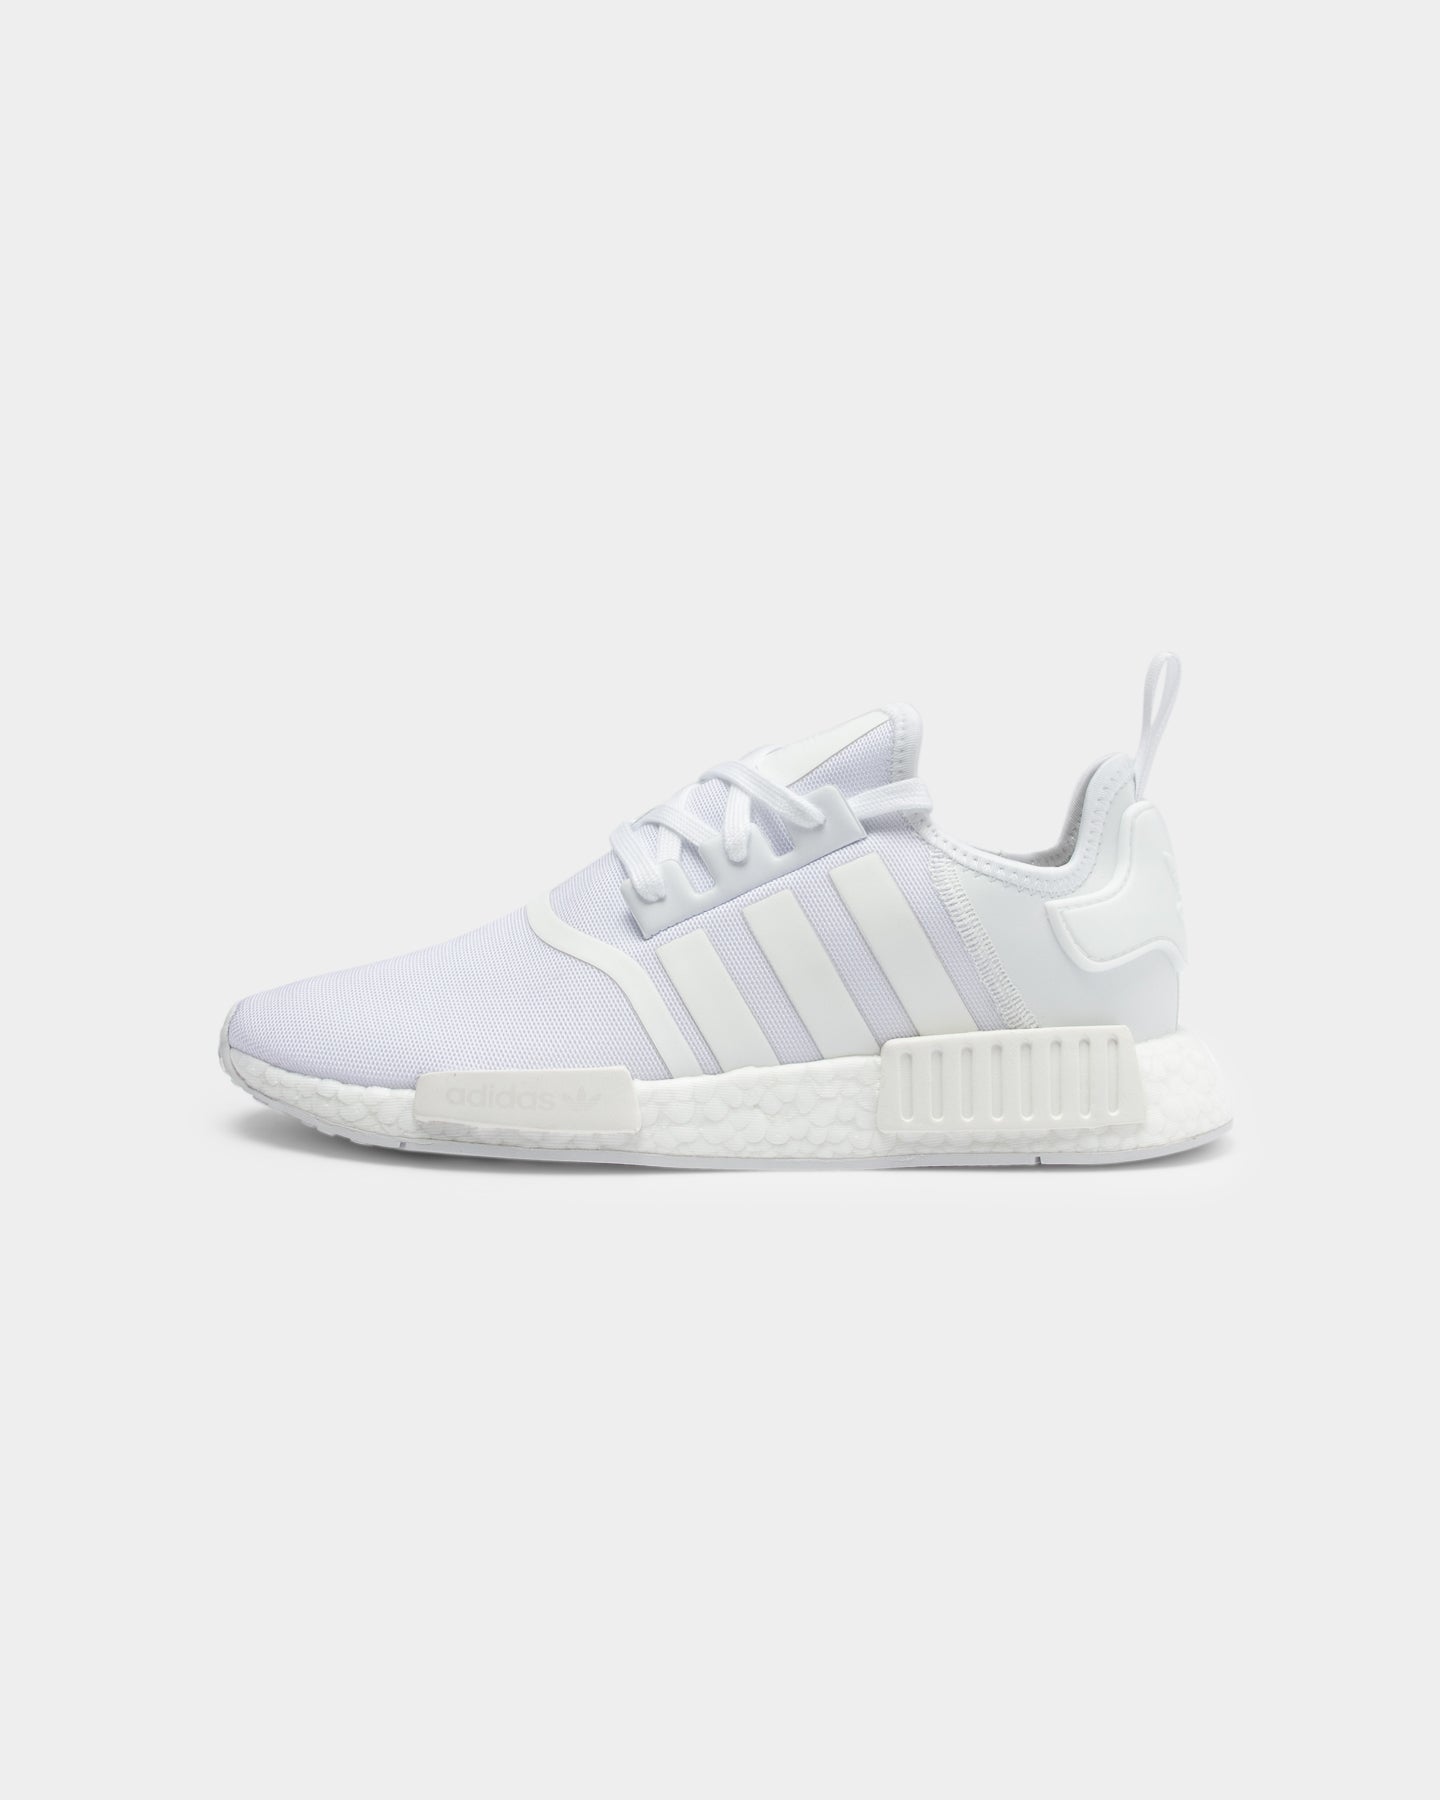 nmd_r1 shoes nz